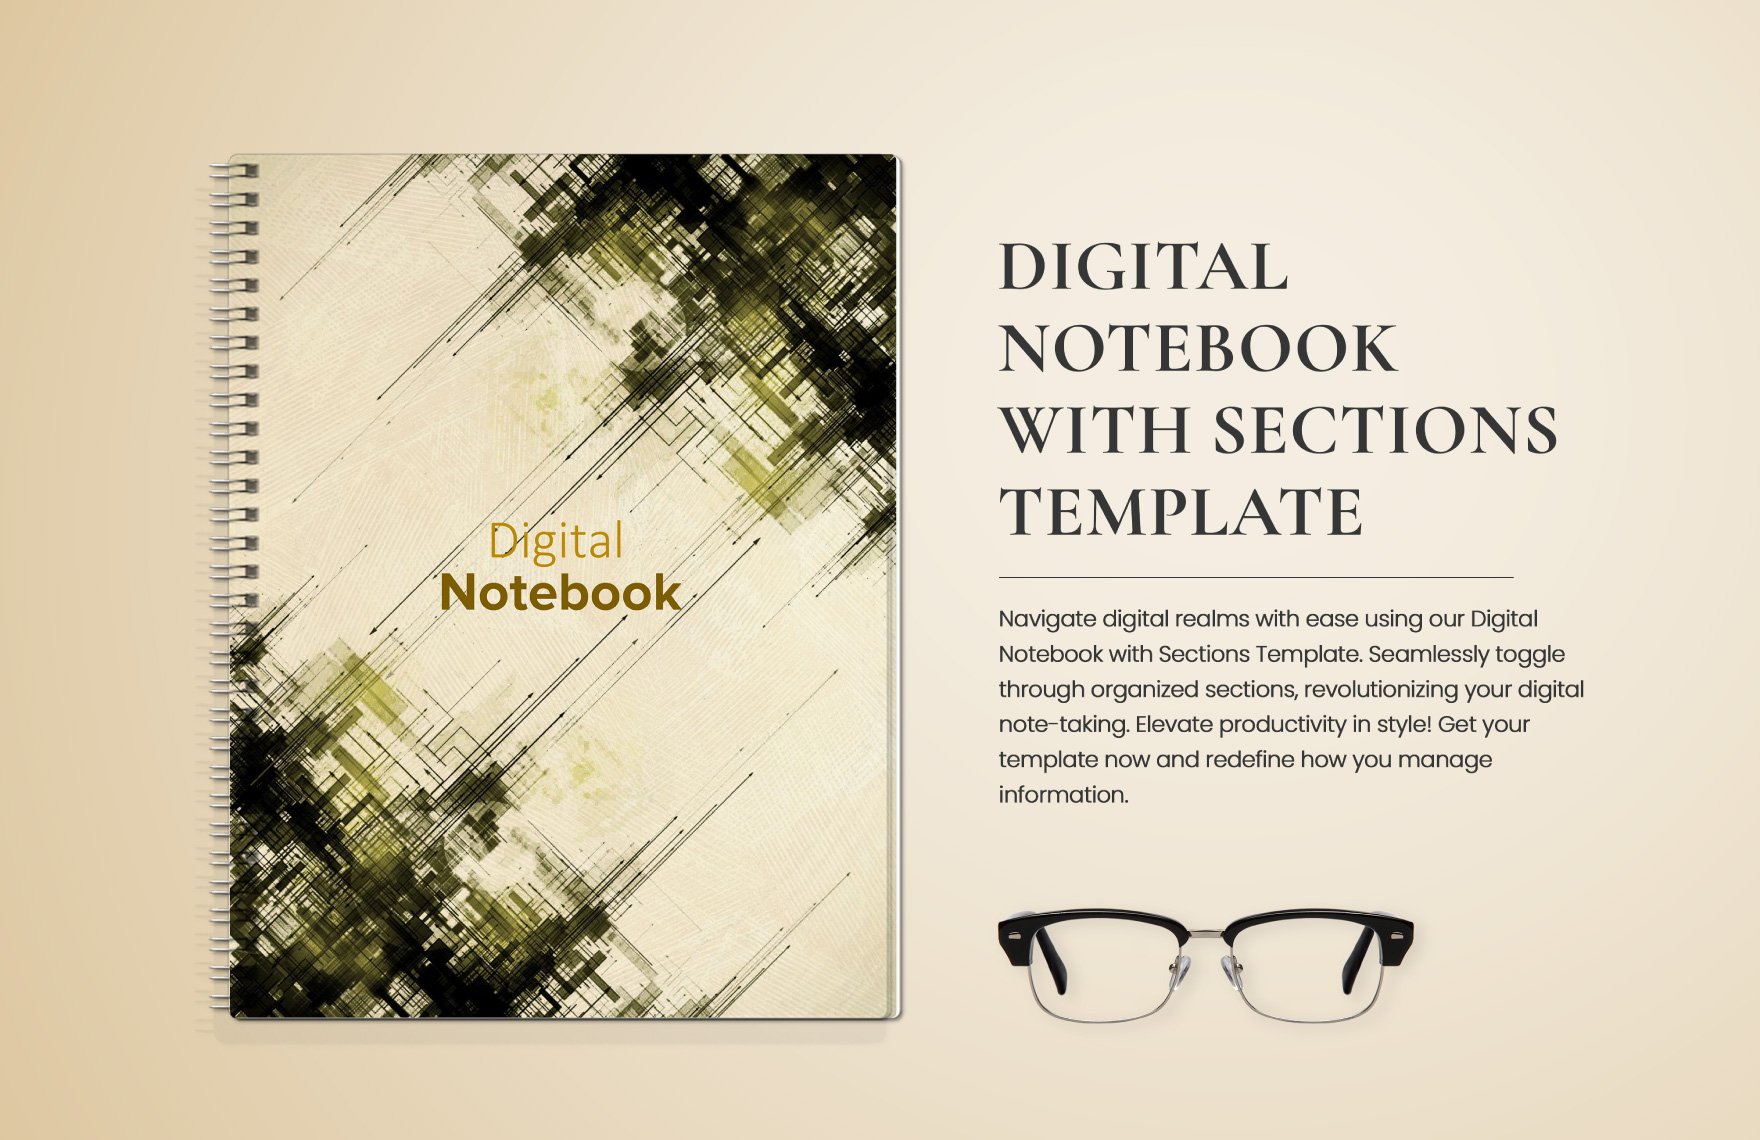 Digital Notebook with Sections Template